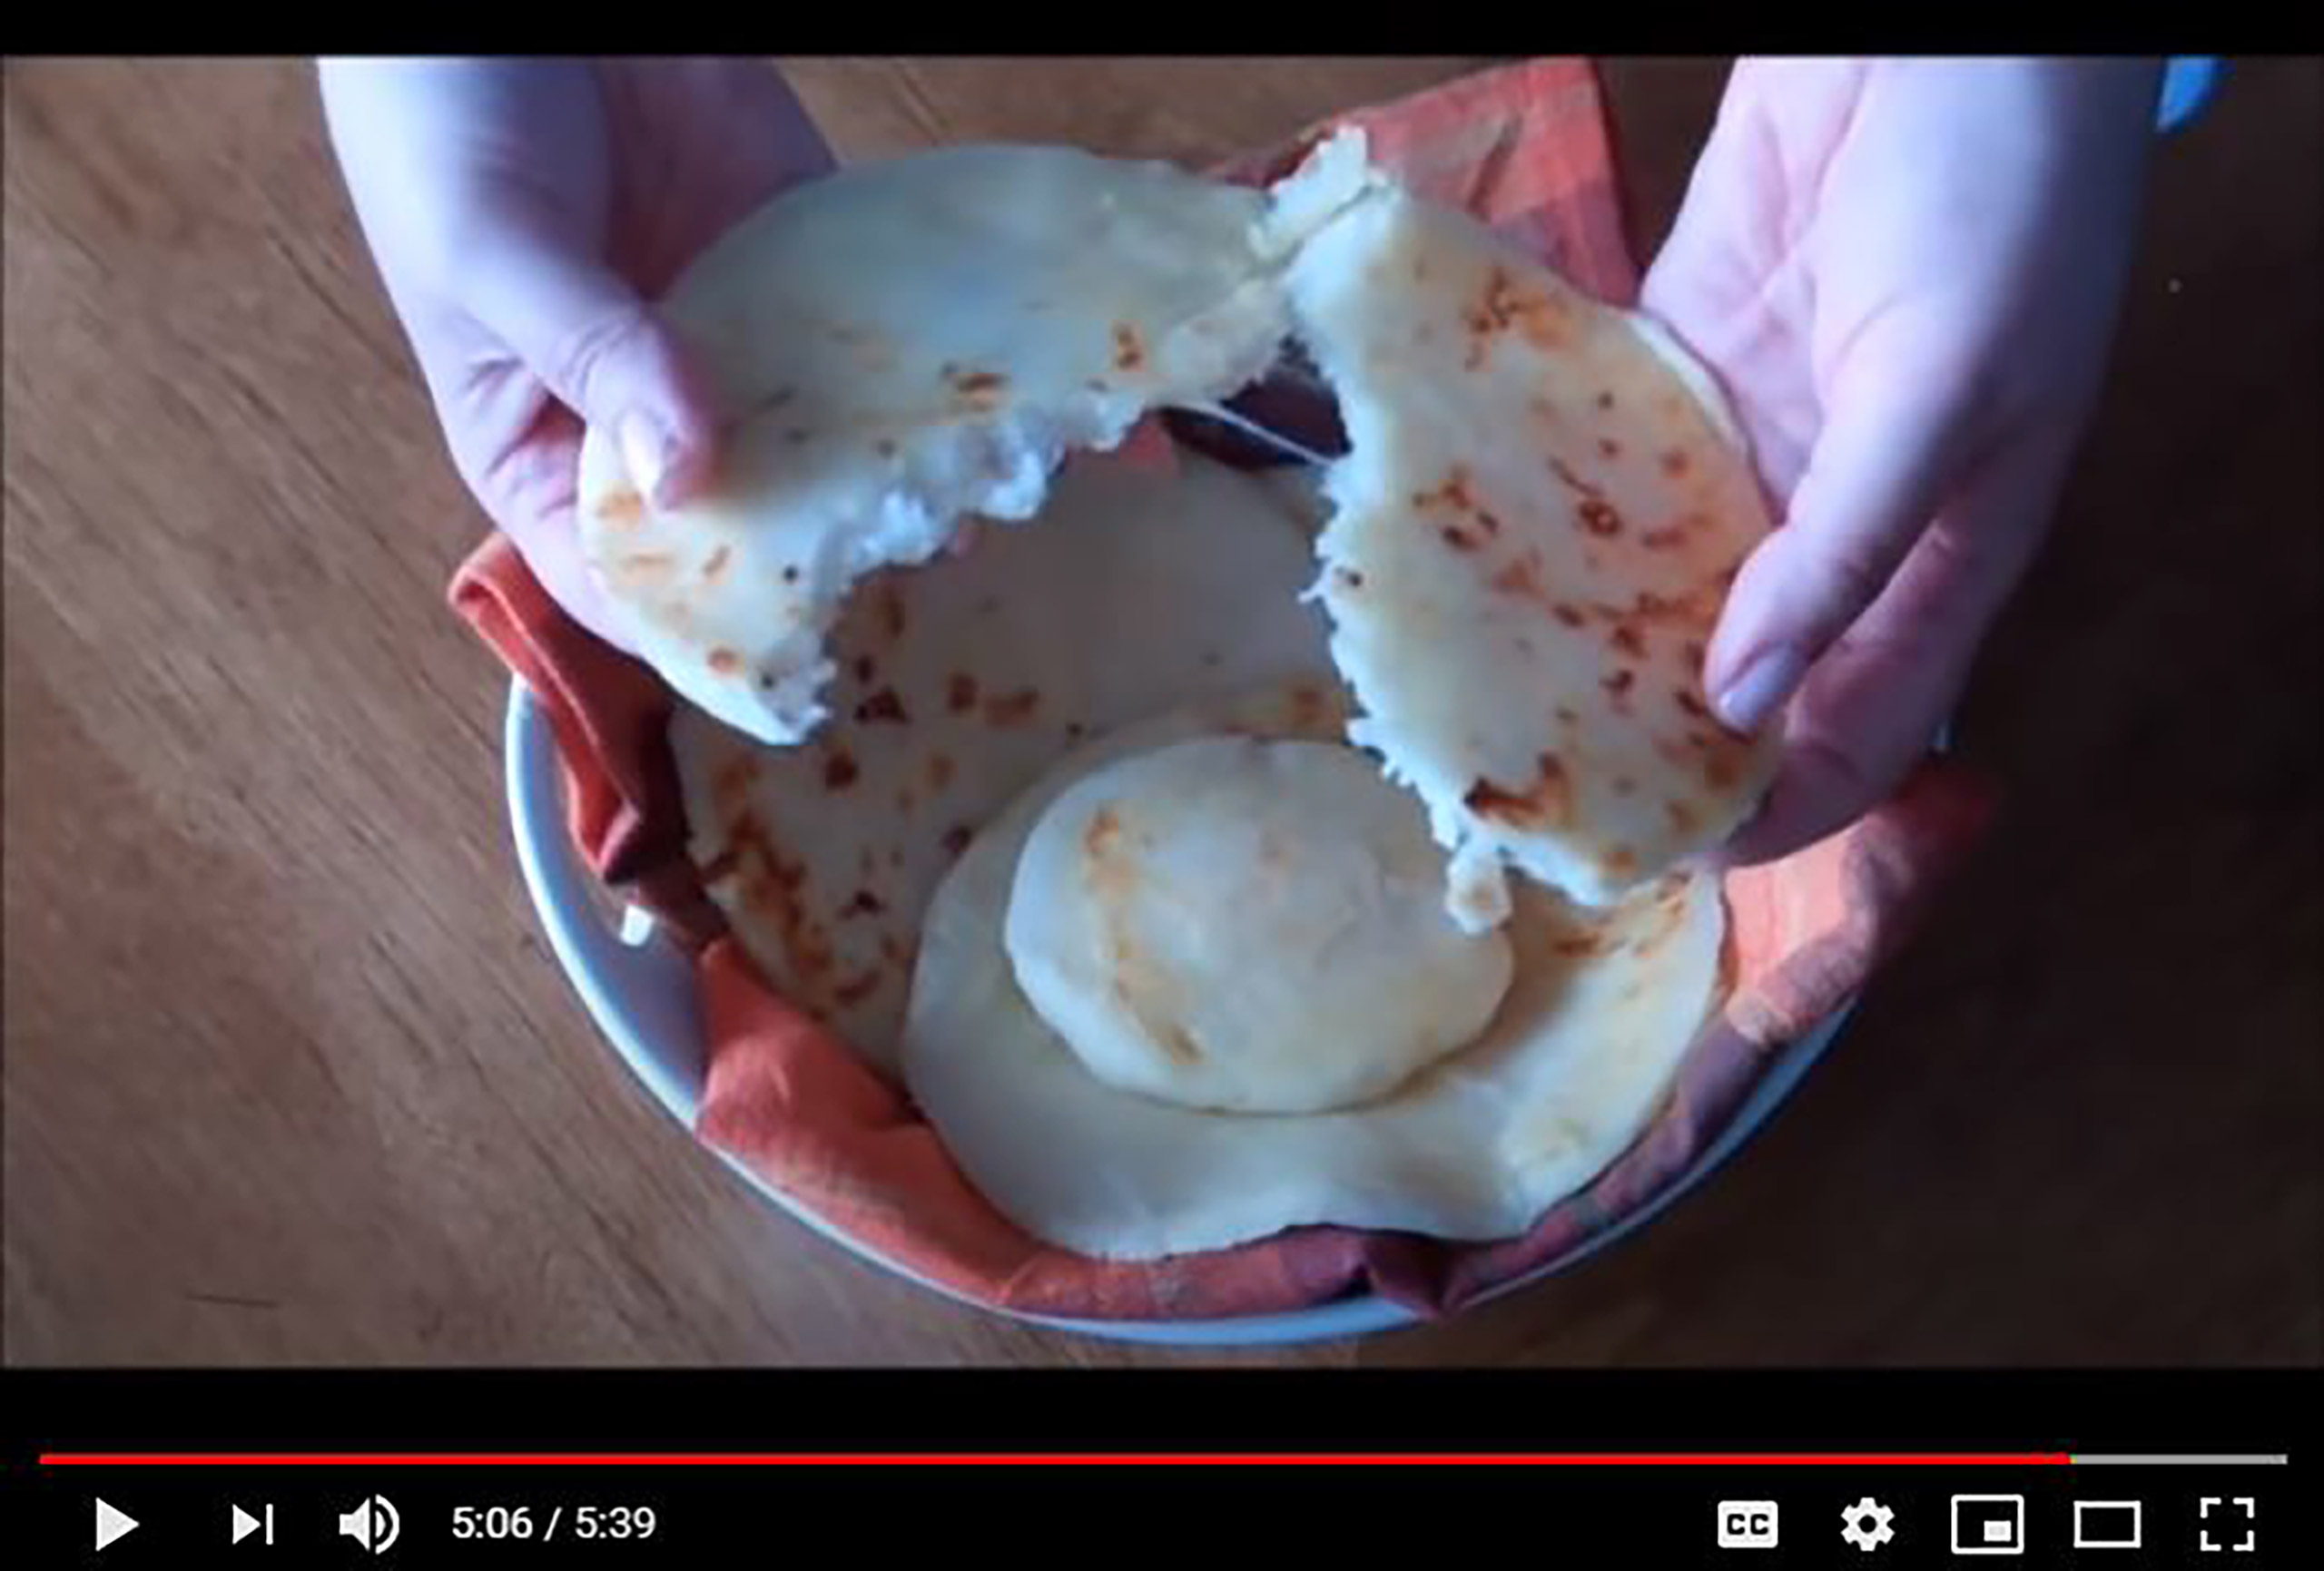 Video still of a flat, round, unleavened piece of dough called arepa being pulled apart to show the mozzarella on the inside